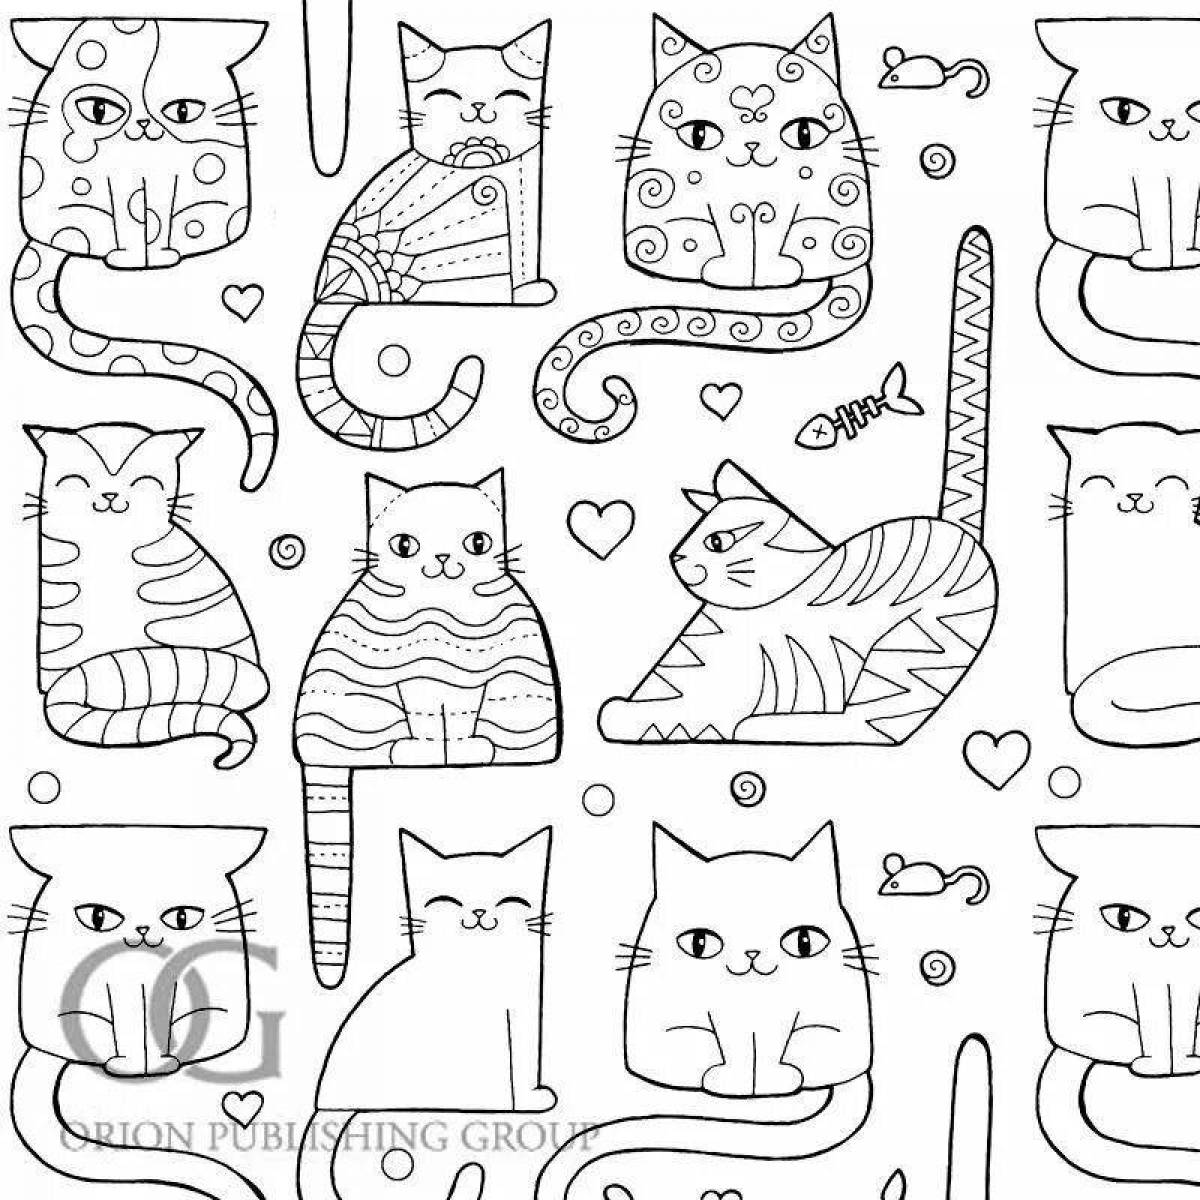 Cute coloring book with lots of cats